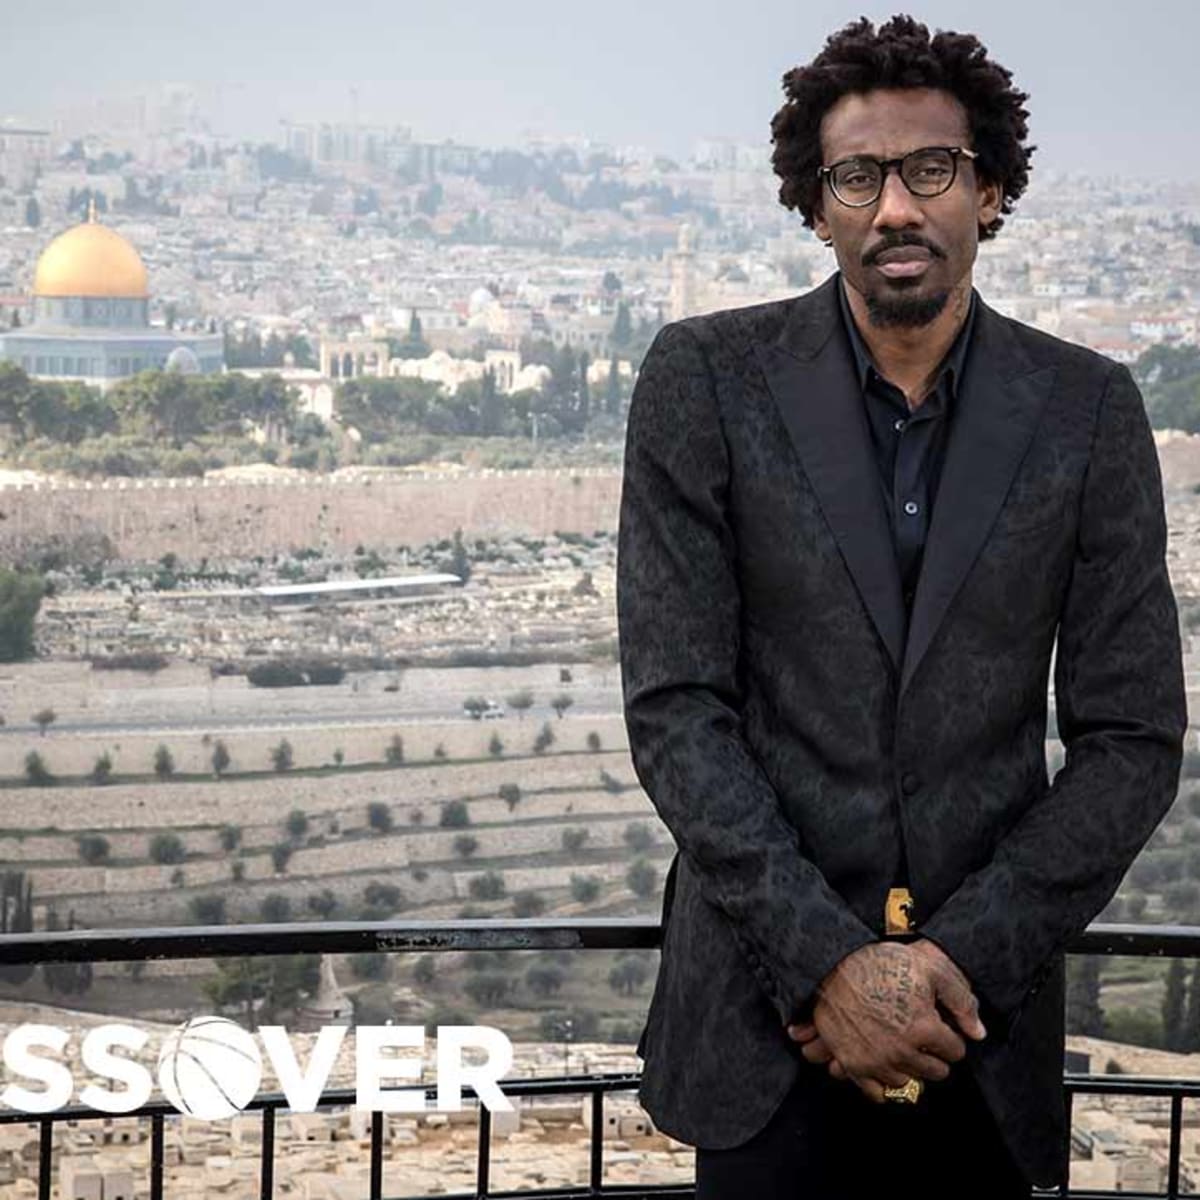 From the NBA to Judaism: The Story of Amar'e Stoudemire